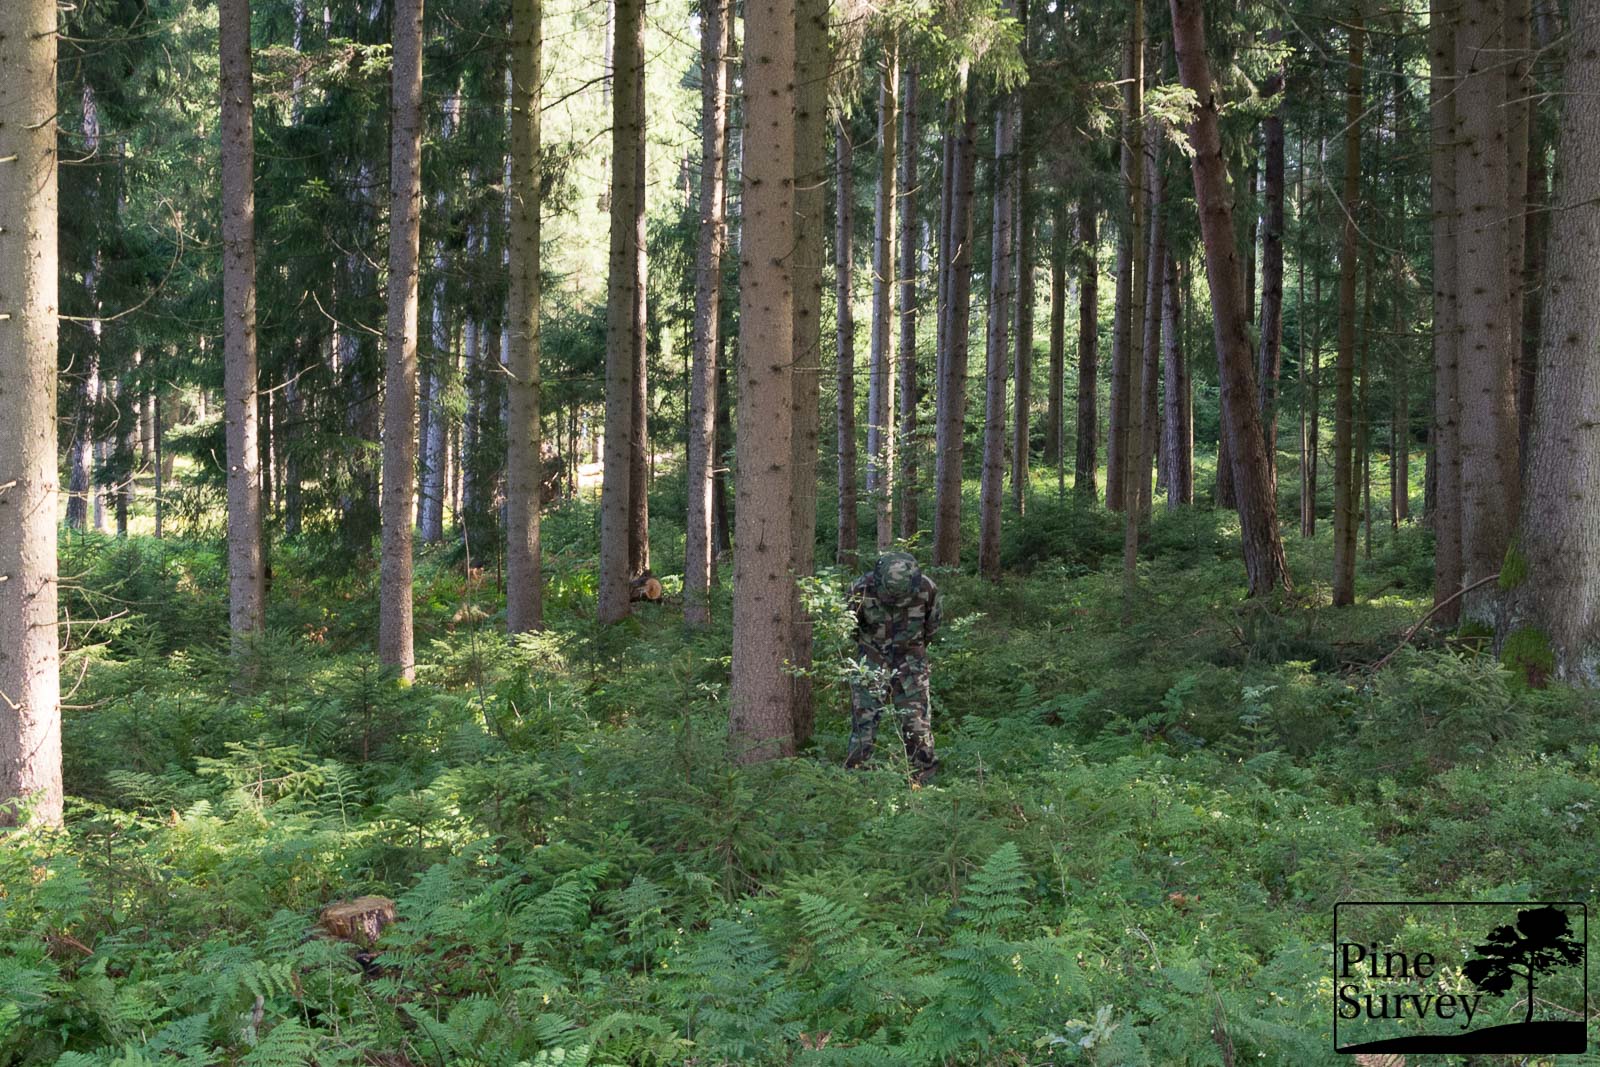 M81 Woodland - Standing position, 35mm